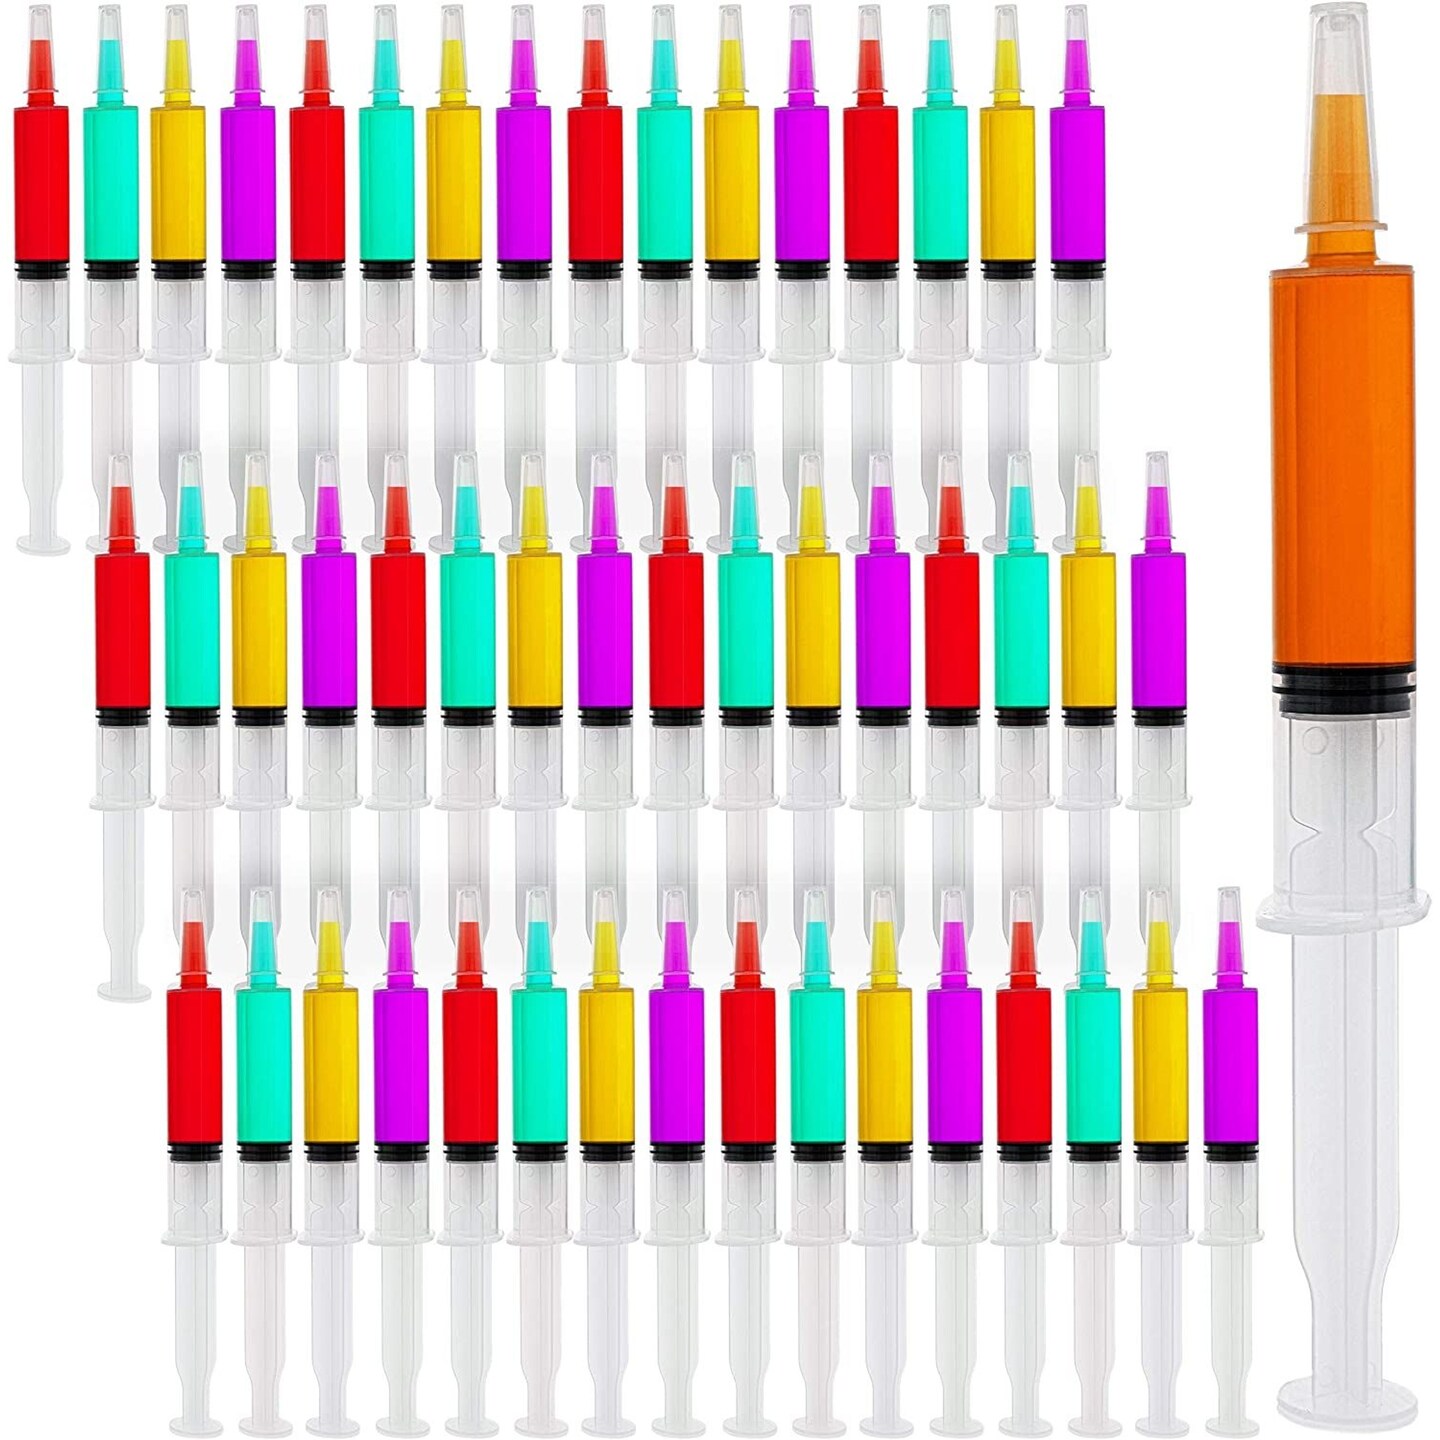 Juvale 30-Pack Plastic Shot Syringes, 1 Oz, Drink Syringes for Parties, Nurse Graduations, New Years Celebrations